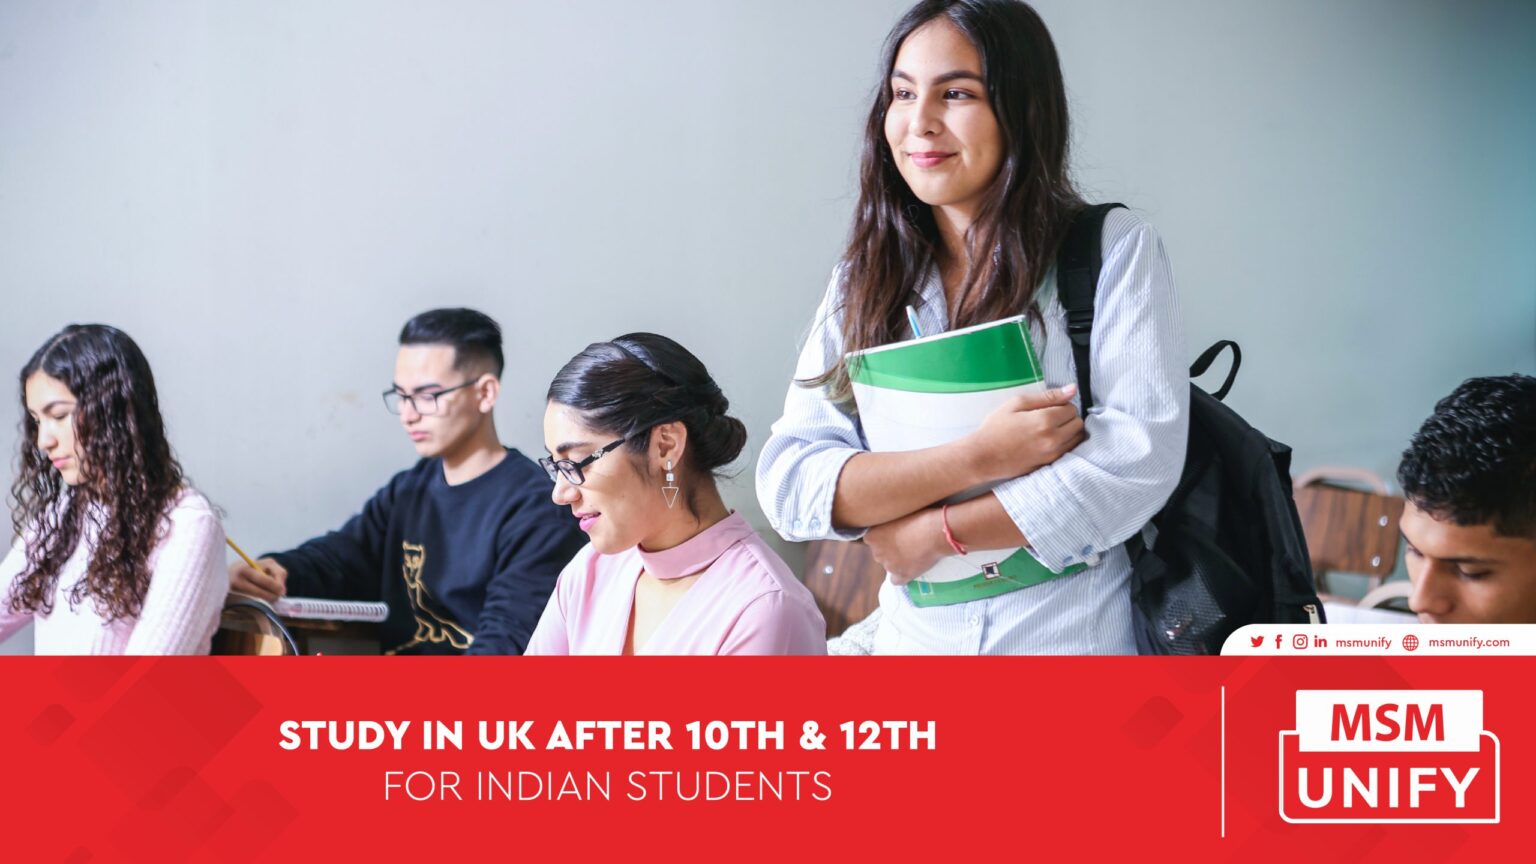 012623 MSM Unify Study in UK after 10th 12th for Indian students 01 scaled 1